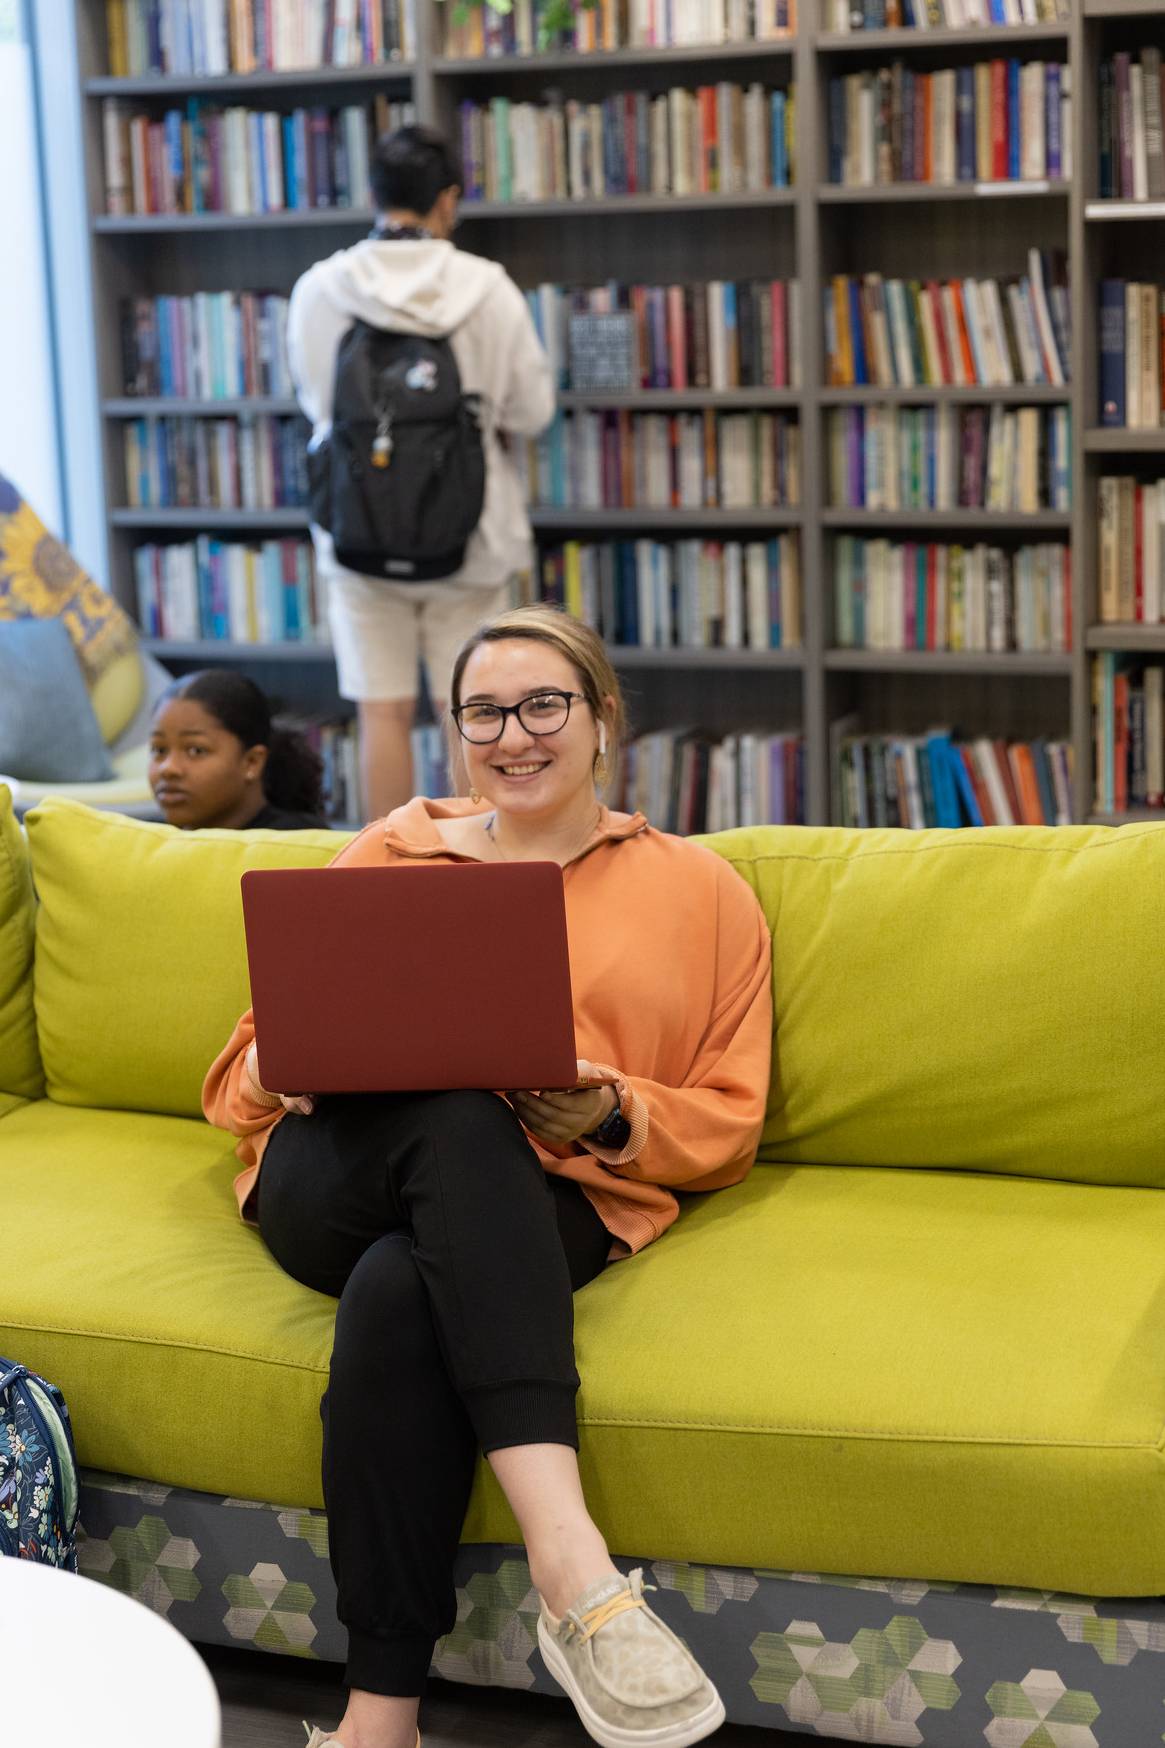 Girl using laptop on green couch with student looking at library.